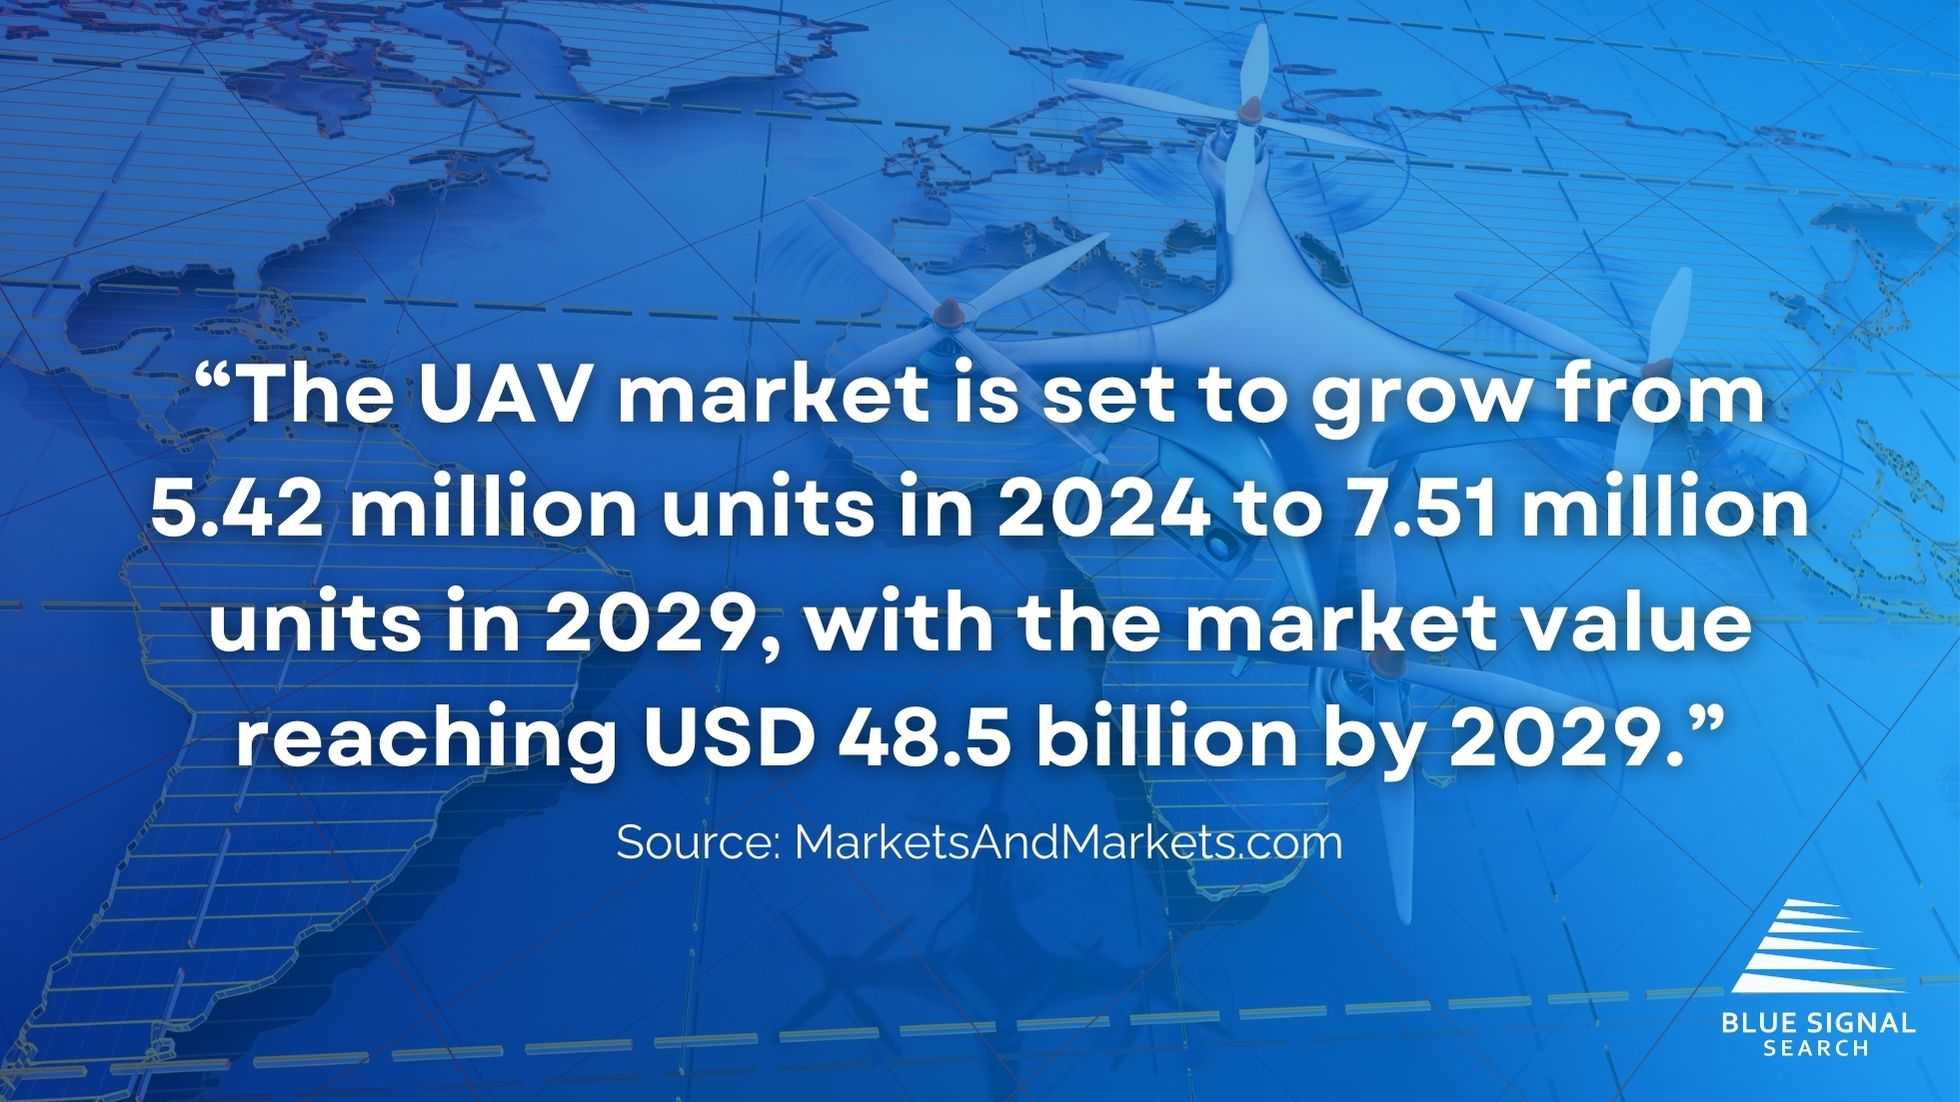 A blue background with a drone image and the text 'The UAV market is set to grow from 5.42 million units in 2024 to 7.51 million units in 2029, with the market value reaching USD 48.5 billion by 2029.